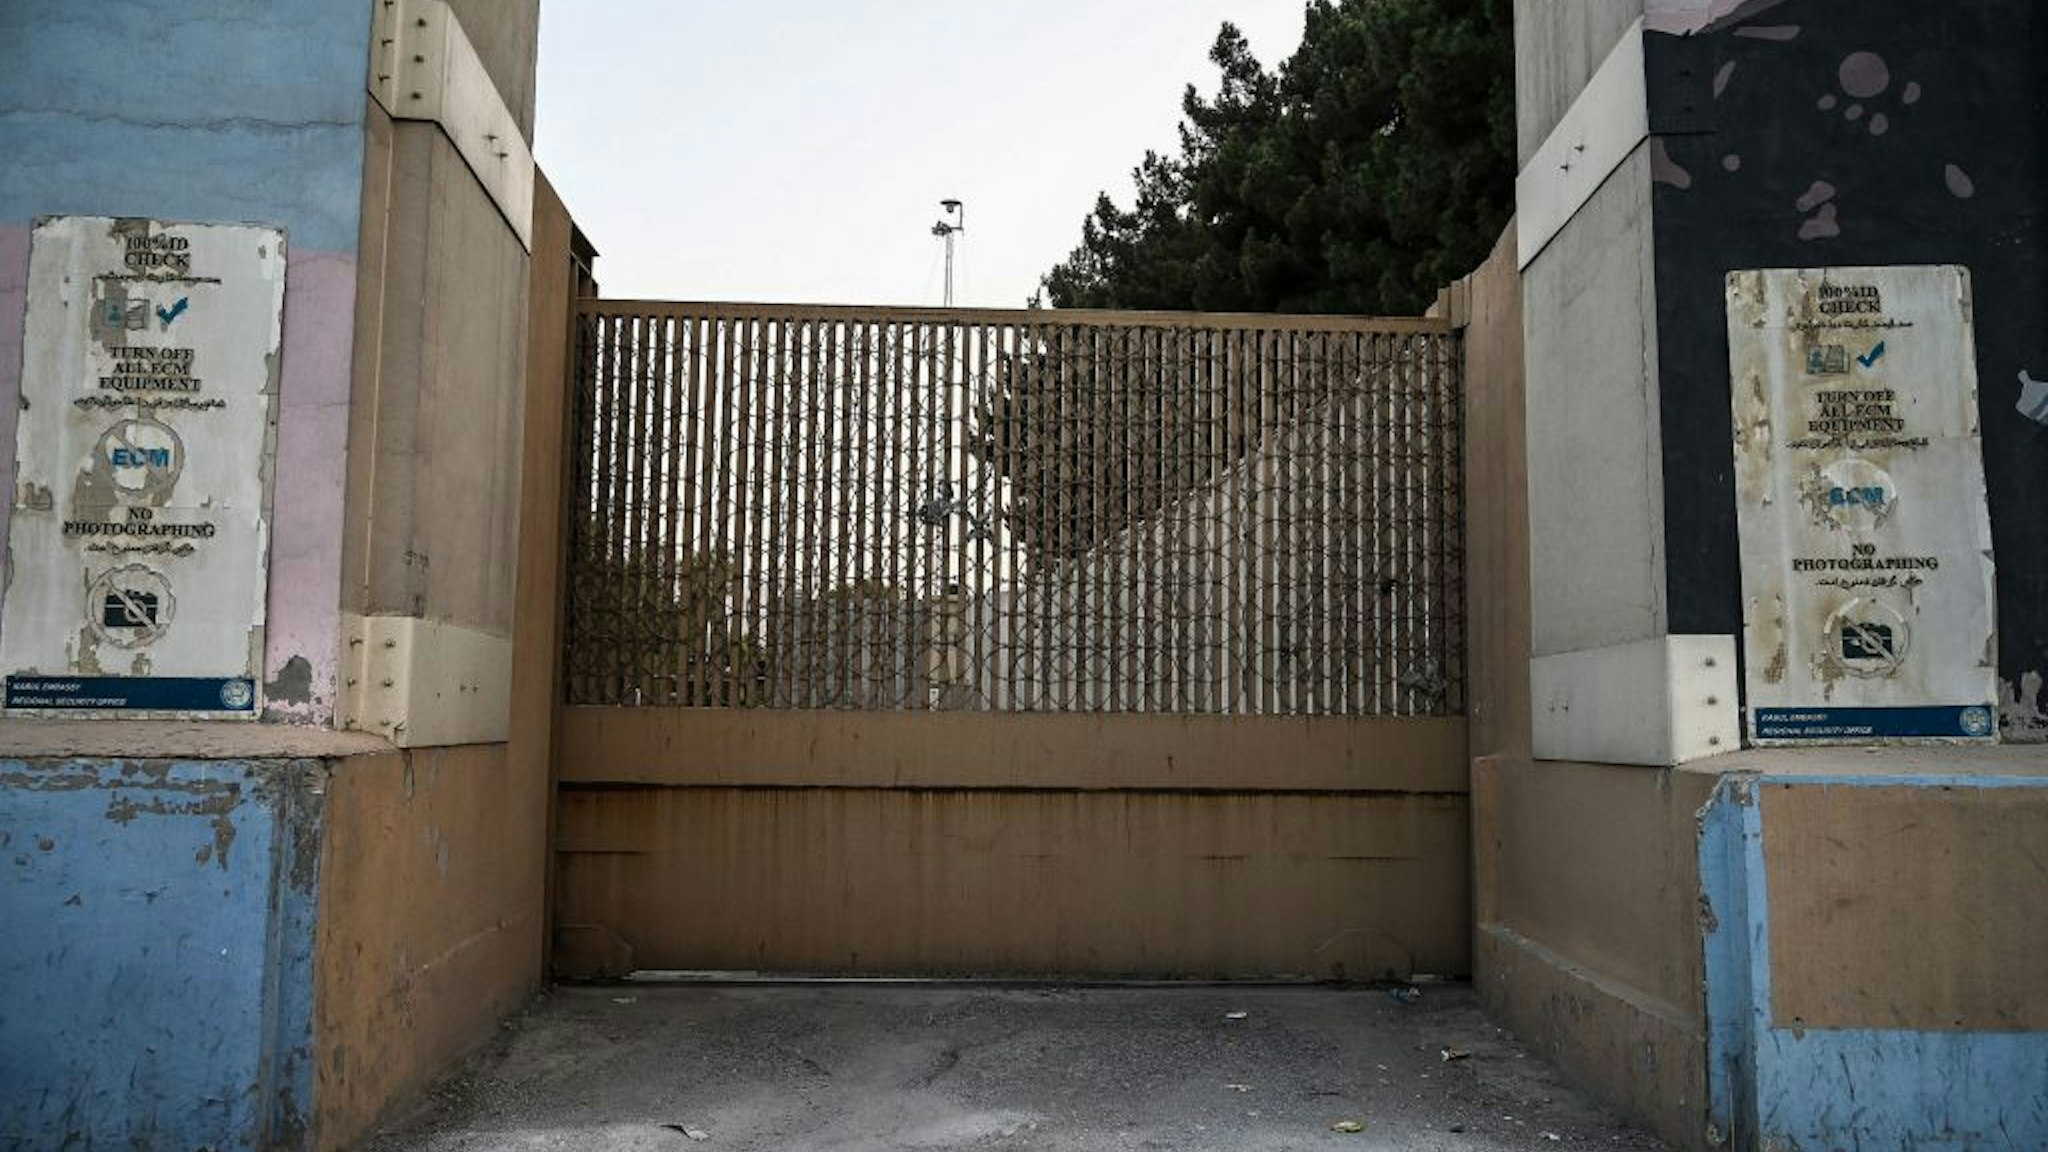 The closed entrance gate of the US embassy is pictured after the US evacuated its personnel in Kabul on August 15, 2021. (Photo by WAKIL KOHSAR / AFP) (Photo by WAKIL KOHSAR/AFP via Getty Images)